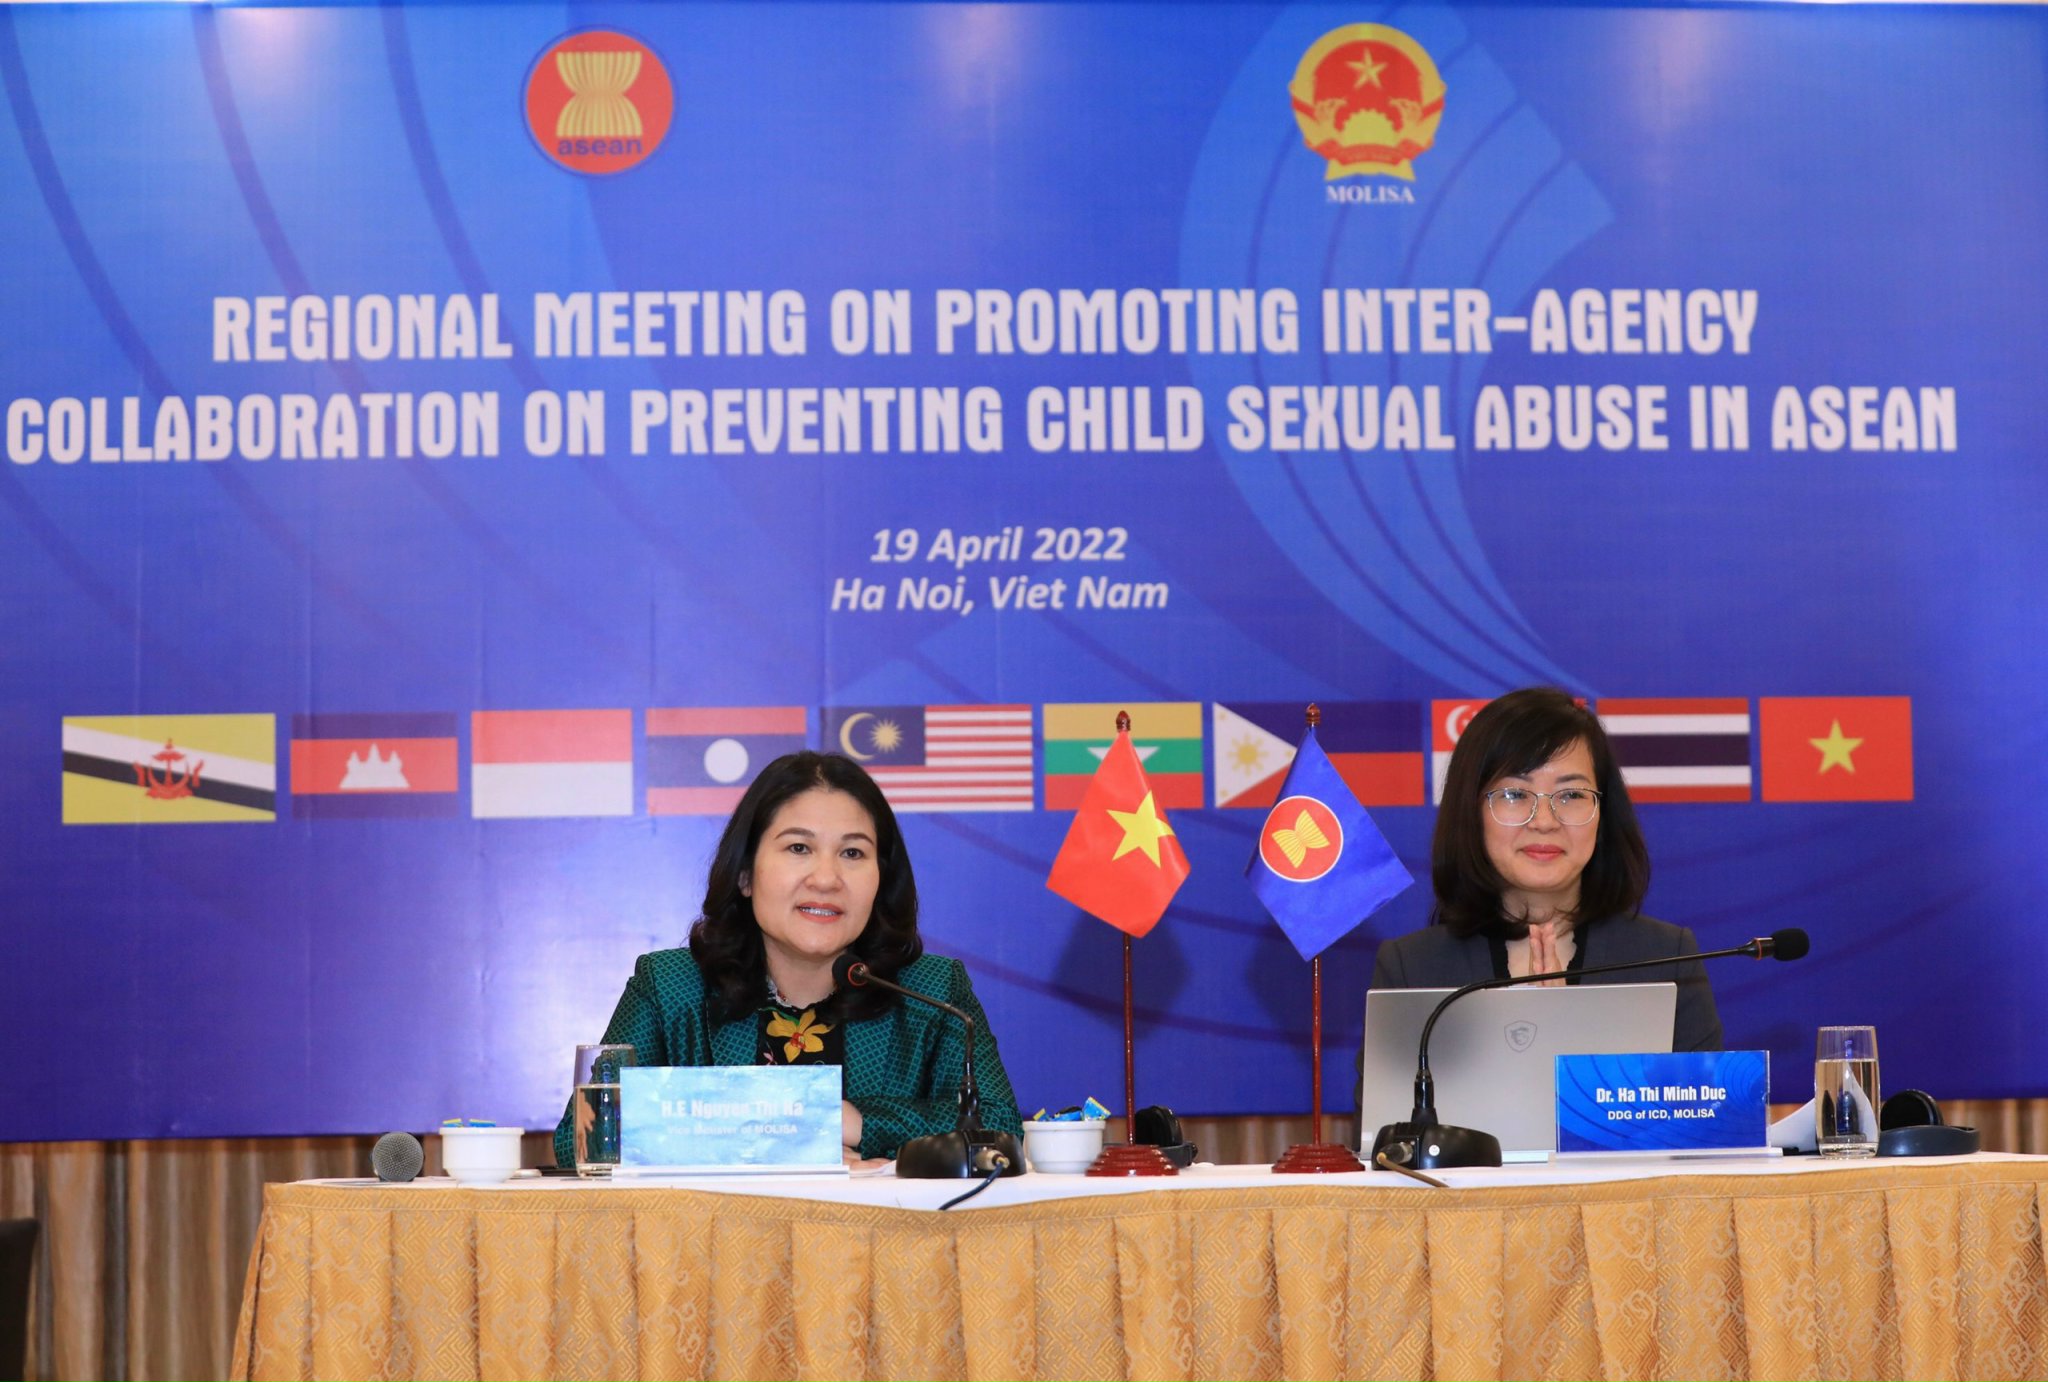 Regional conference on promoting inter-agency collaboration on preventing child sexual abuse in ASEAN